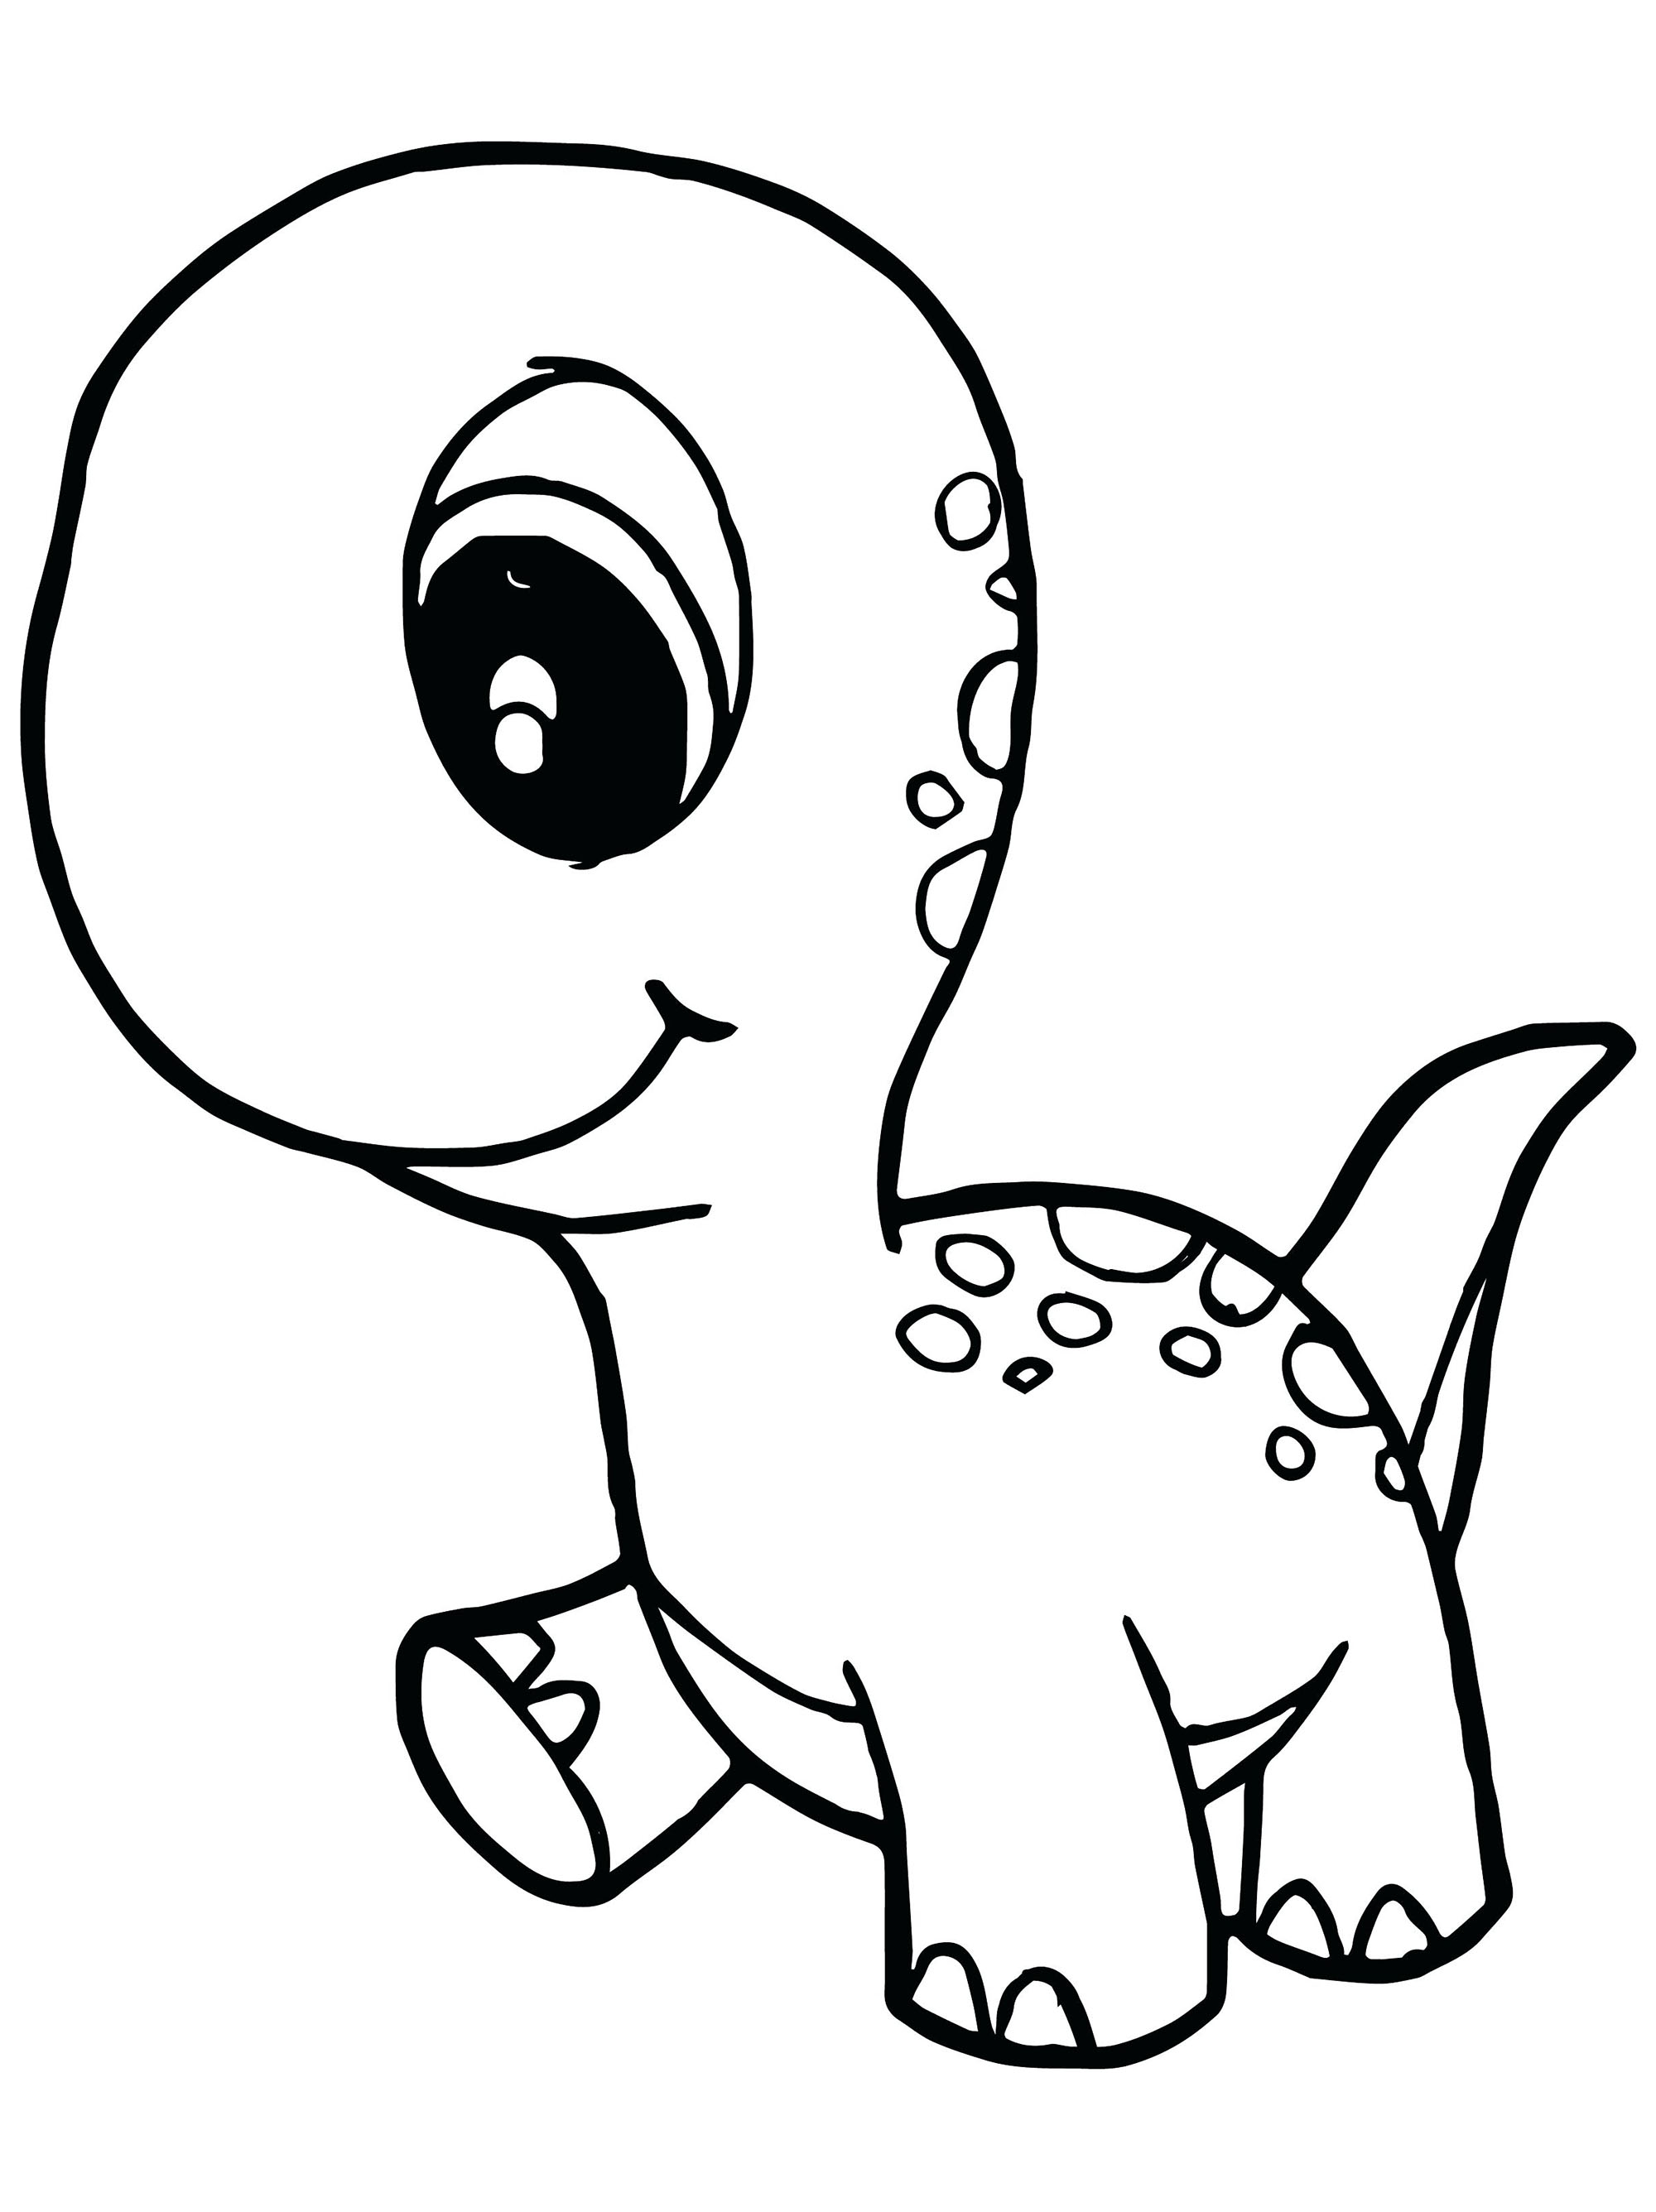 Dinosaurs to download  Ba   Dinosaurs Kids Coloring Pages